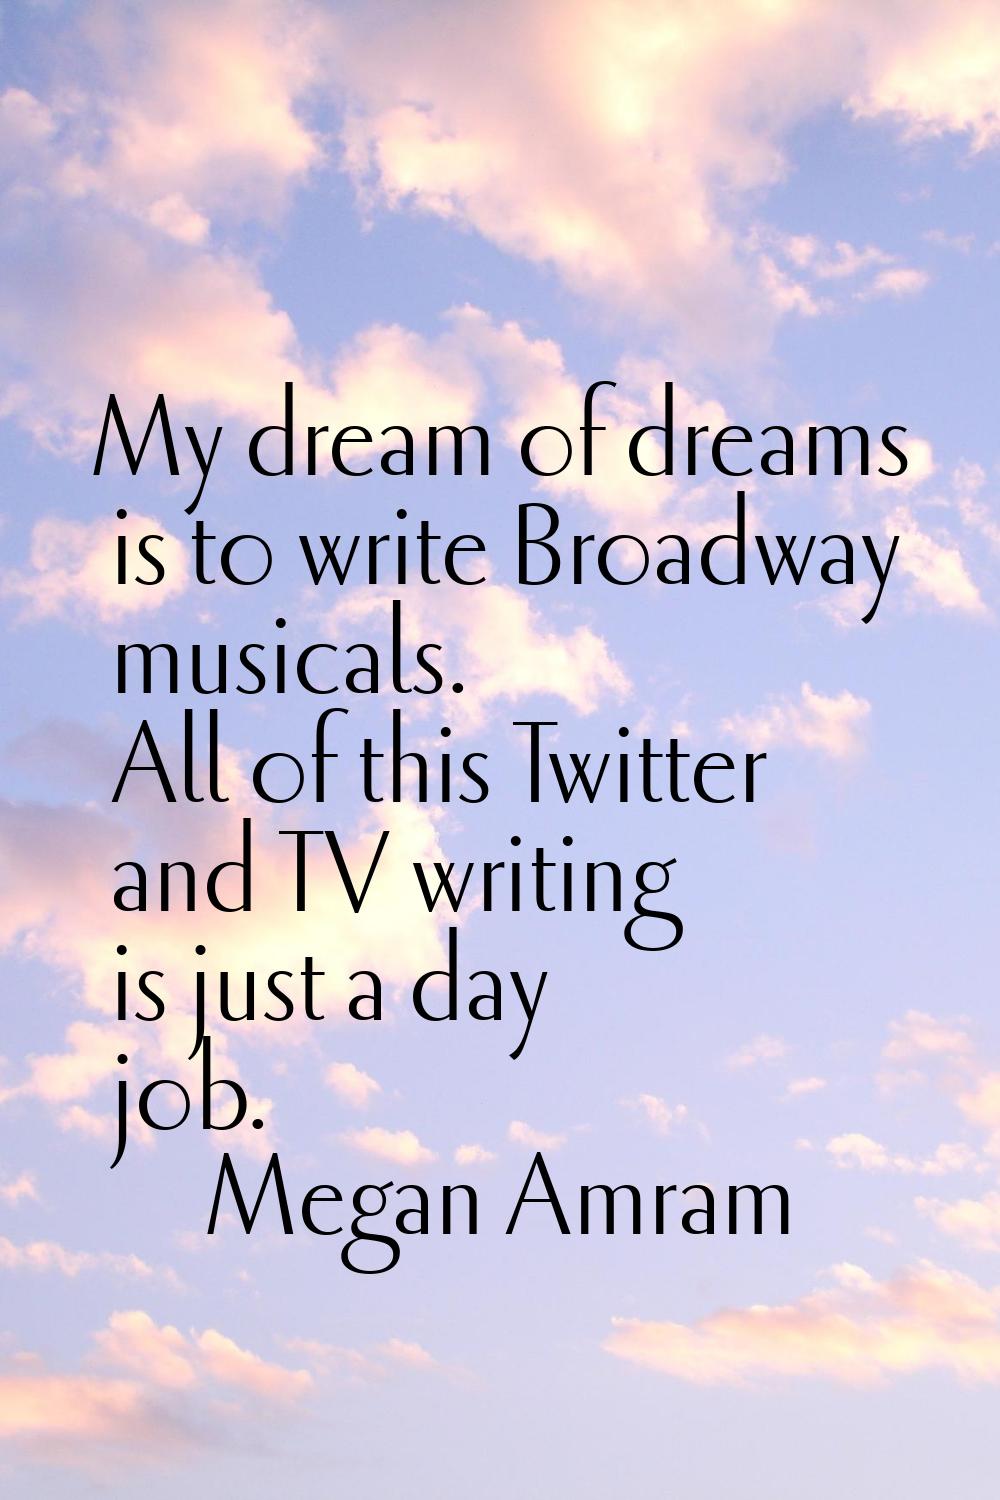 My dream of dreams is to write Broadway musicals. All of this Twitter and TV writing is just a day 